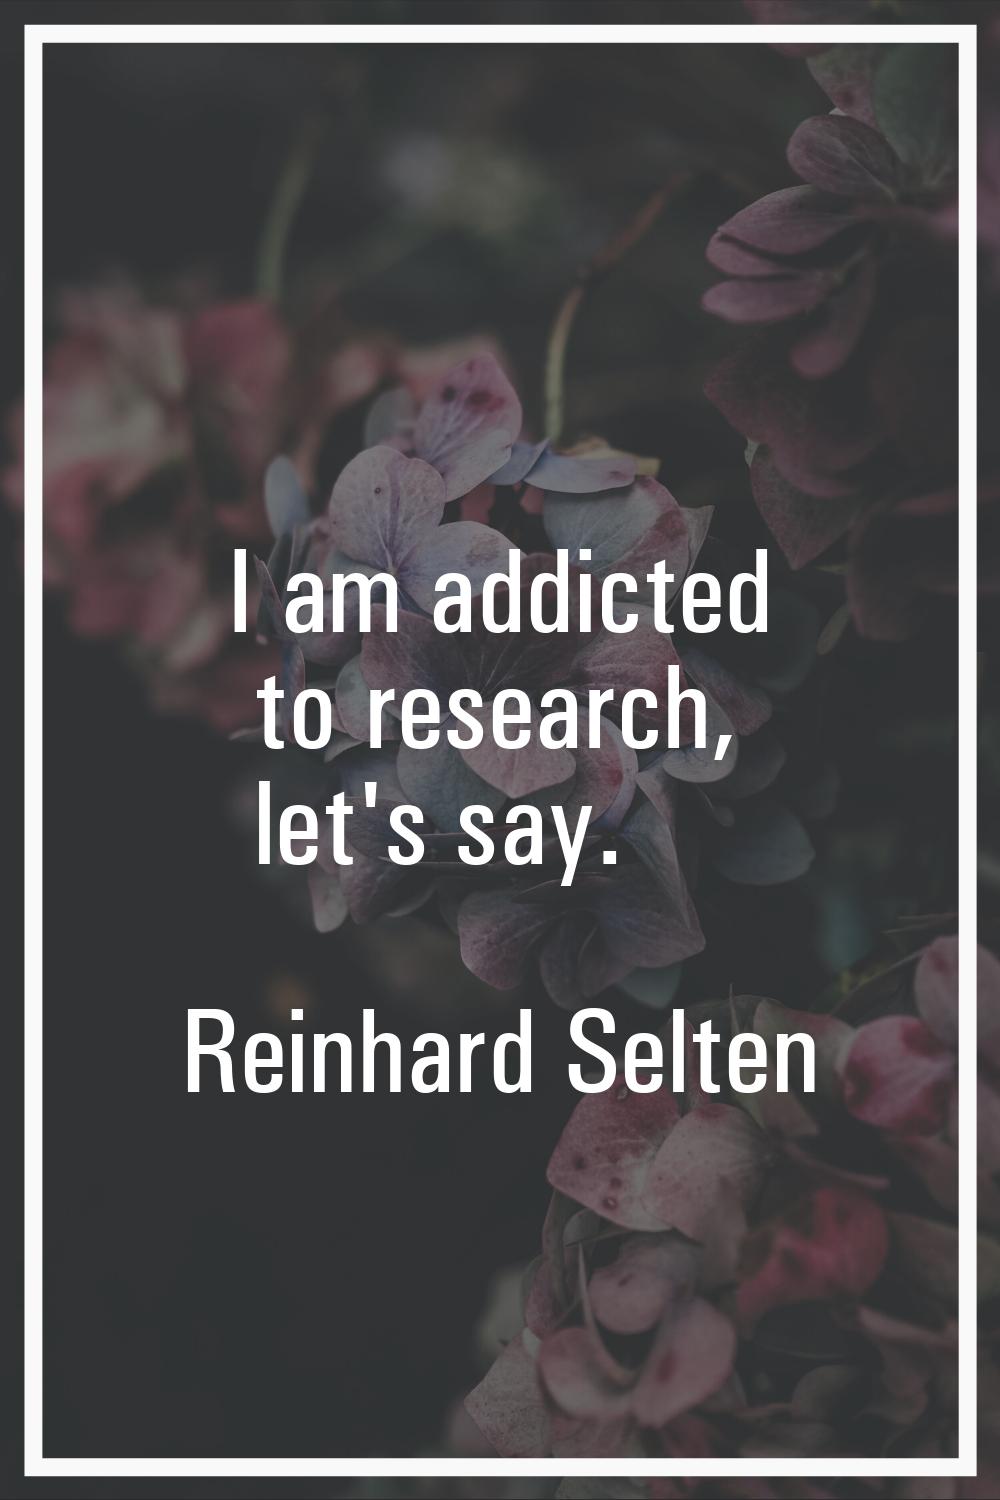 I am addicted to research, let's say.